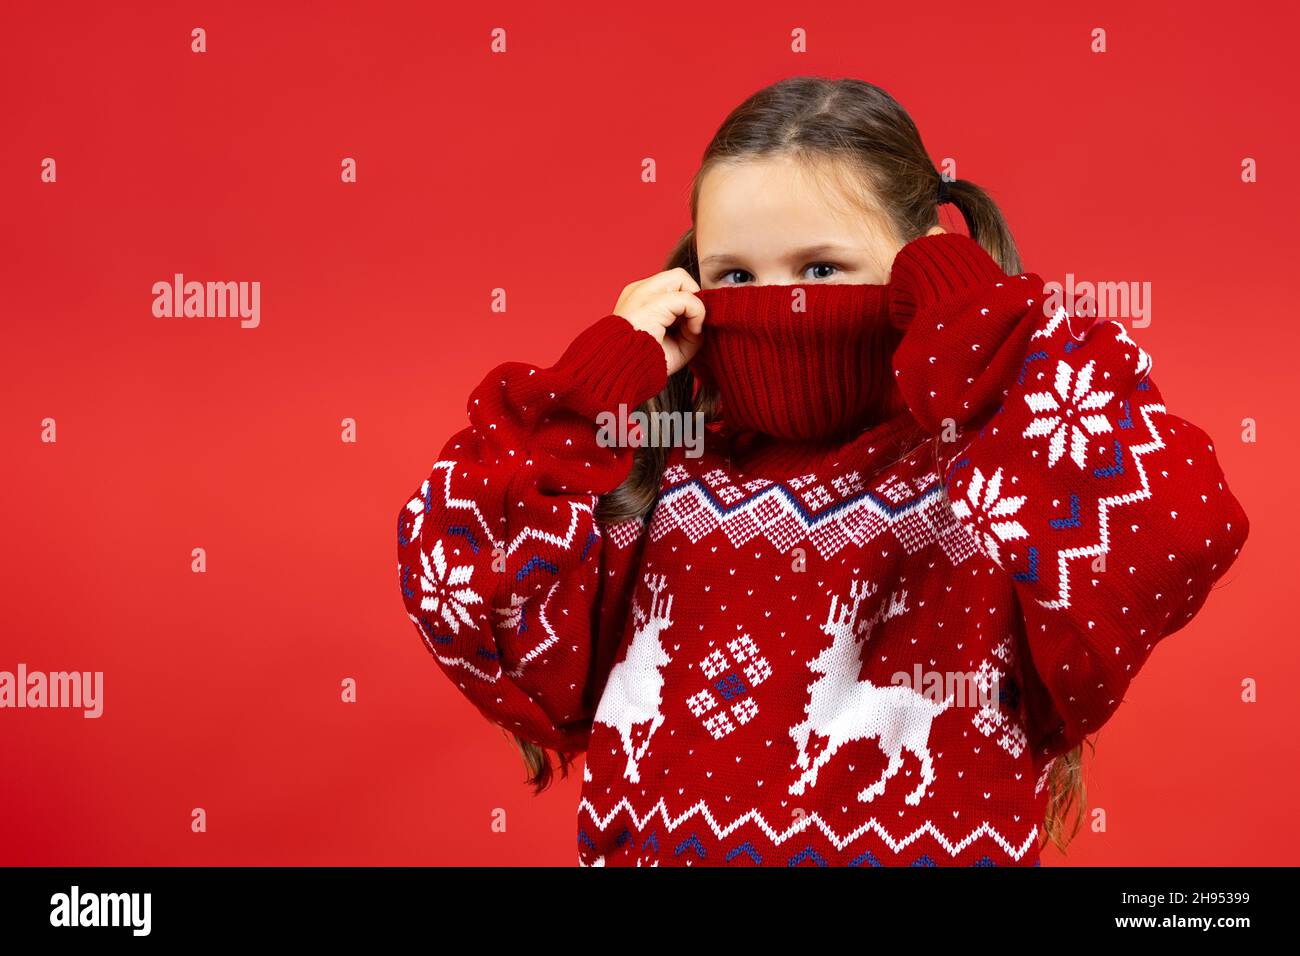 close - up portrait of playful girl hiding half face in red Christmas sweater with reindeer , isolated on red background Stock Photo